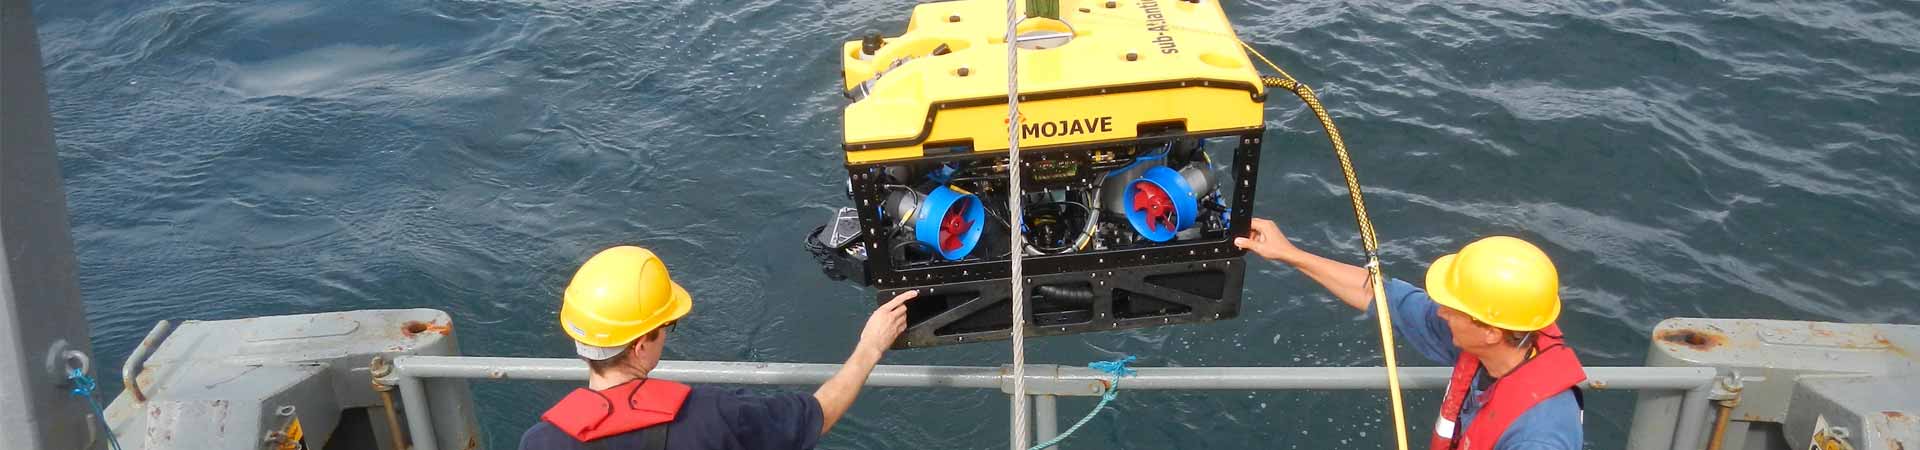 Deploying a remotely operated vehicle (ROV) for testing